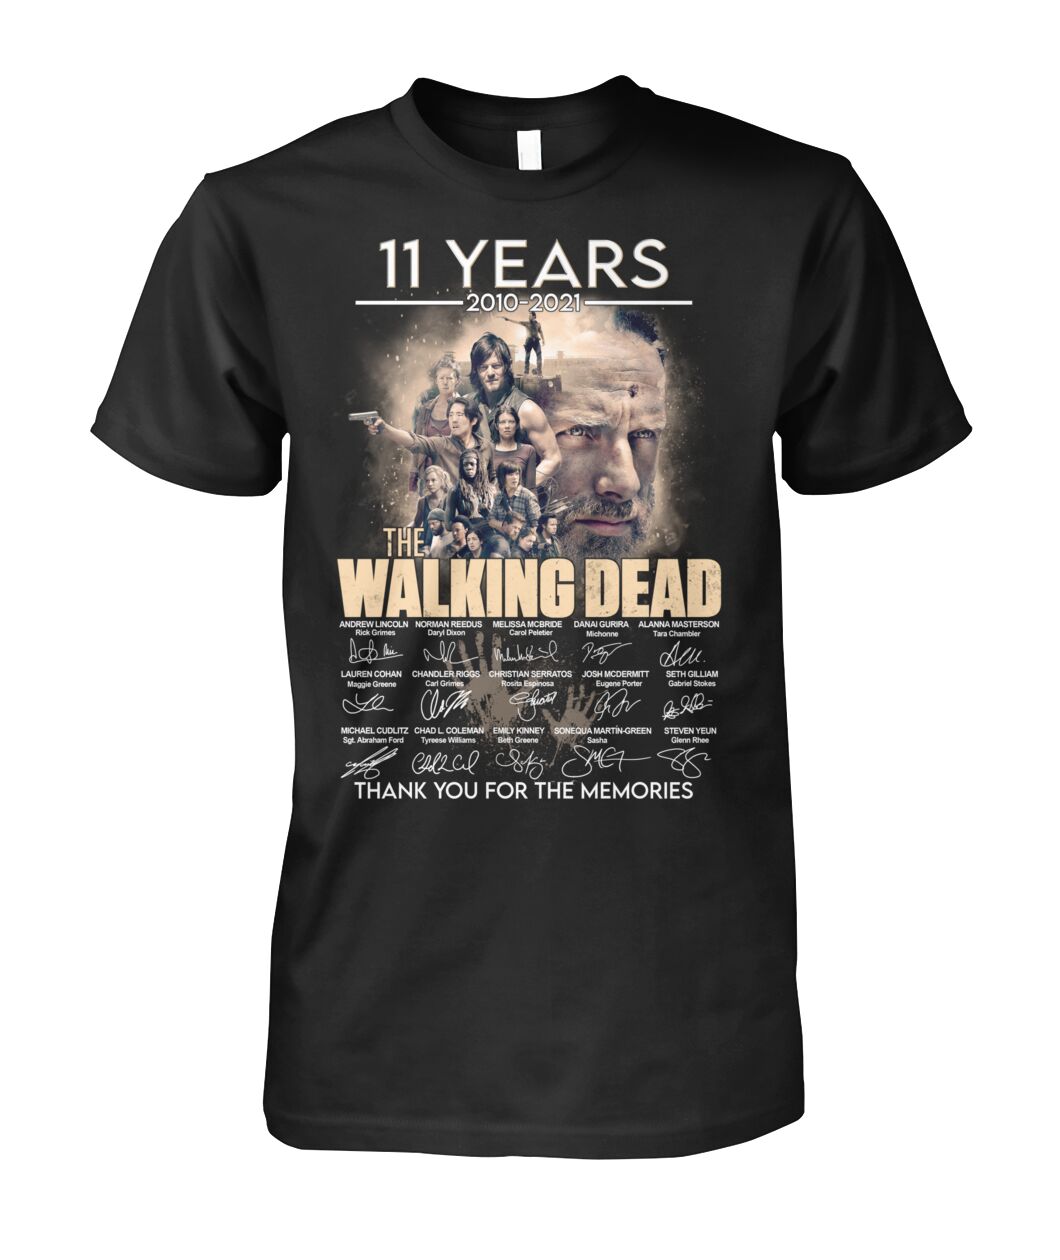 11 years The walking dead signature thank you for the memories shirt